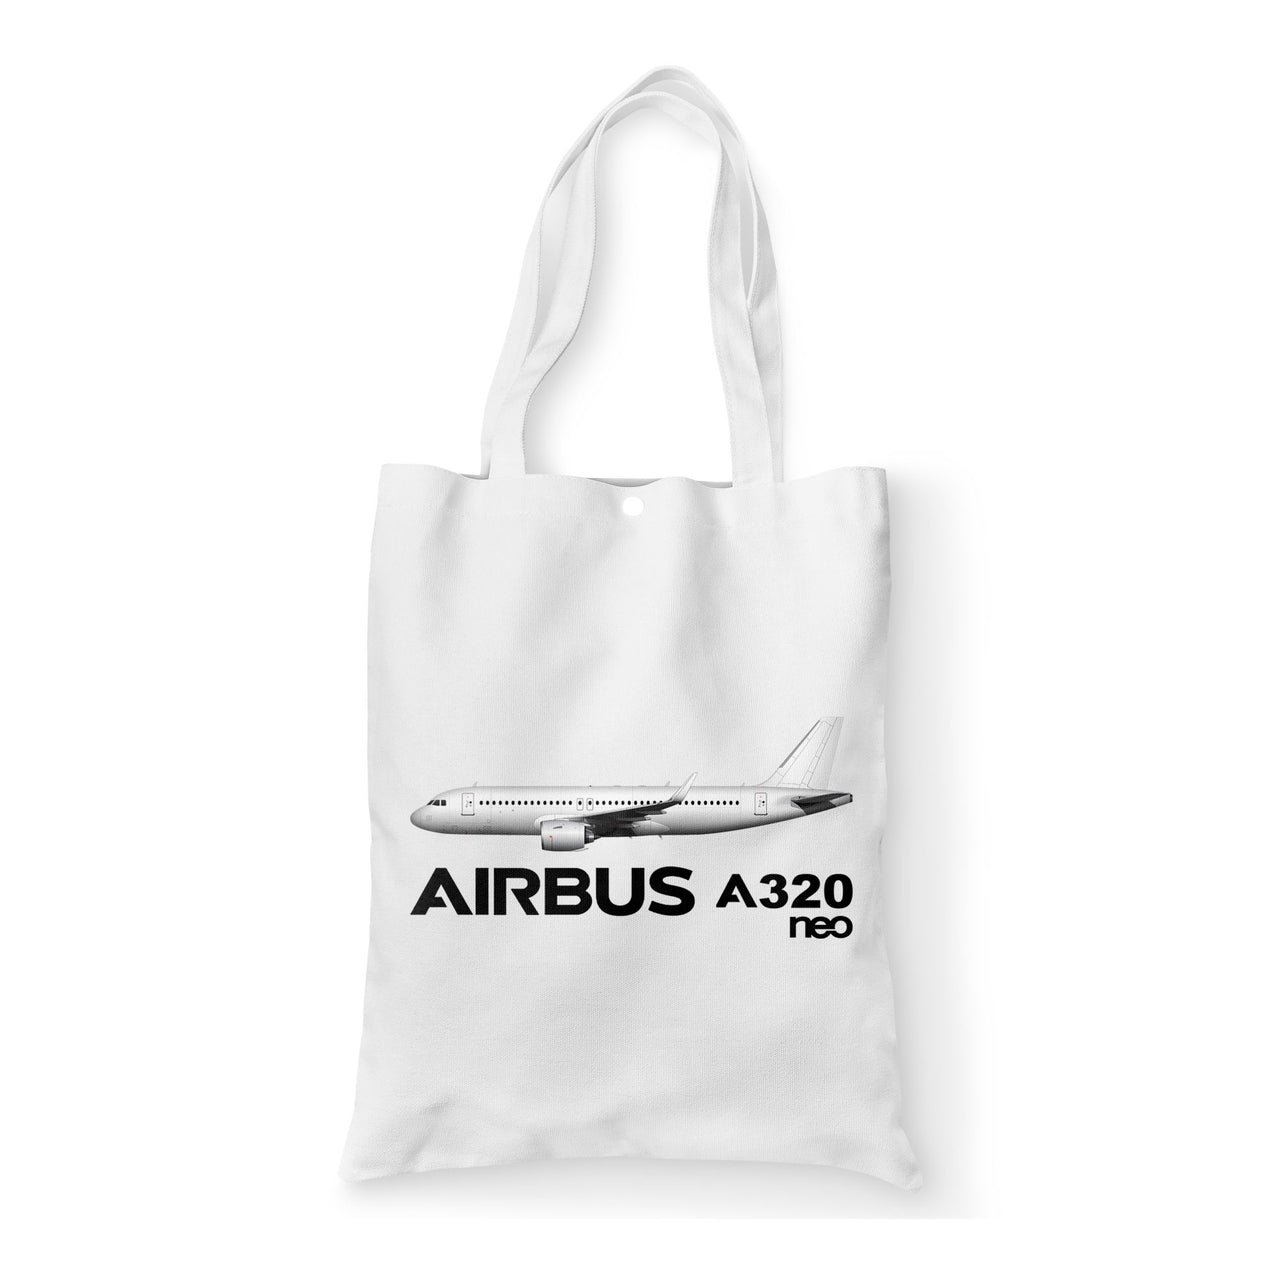 The Airbus A320Neo Designed Tote Bags